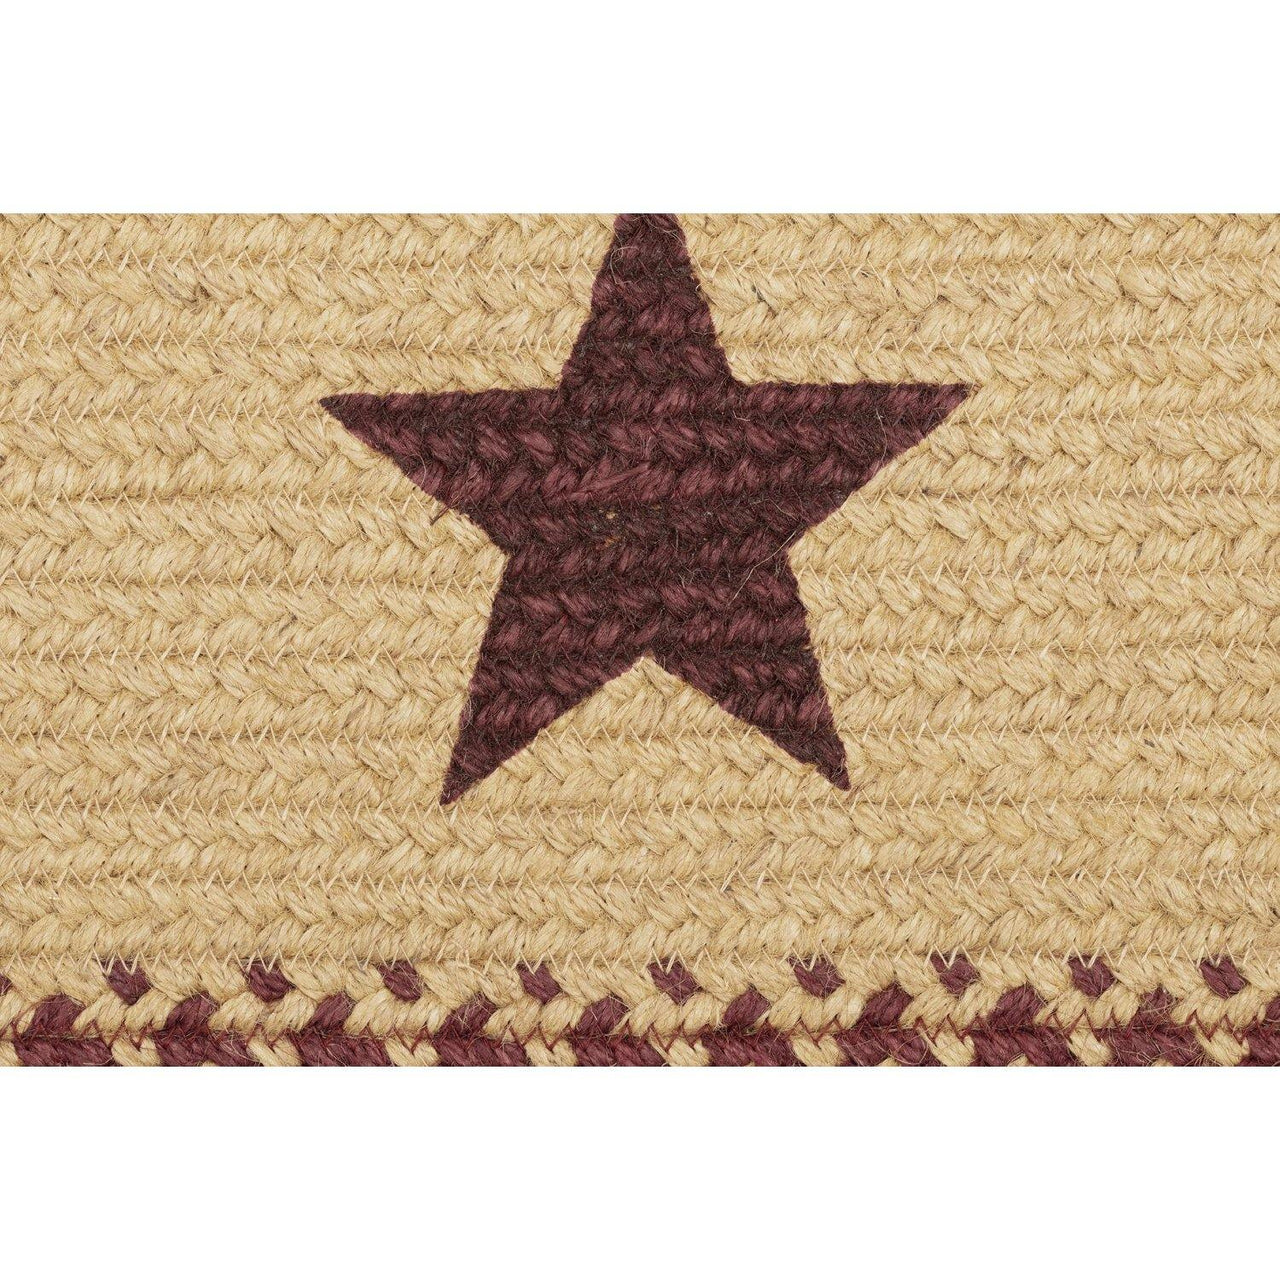 Burgundy Red Primitive Jute Braided Rug Rect Stencil Stars Welcome 20"x30" with Rug Pad VHC Brands - The Fox Decor